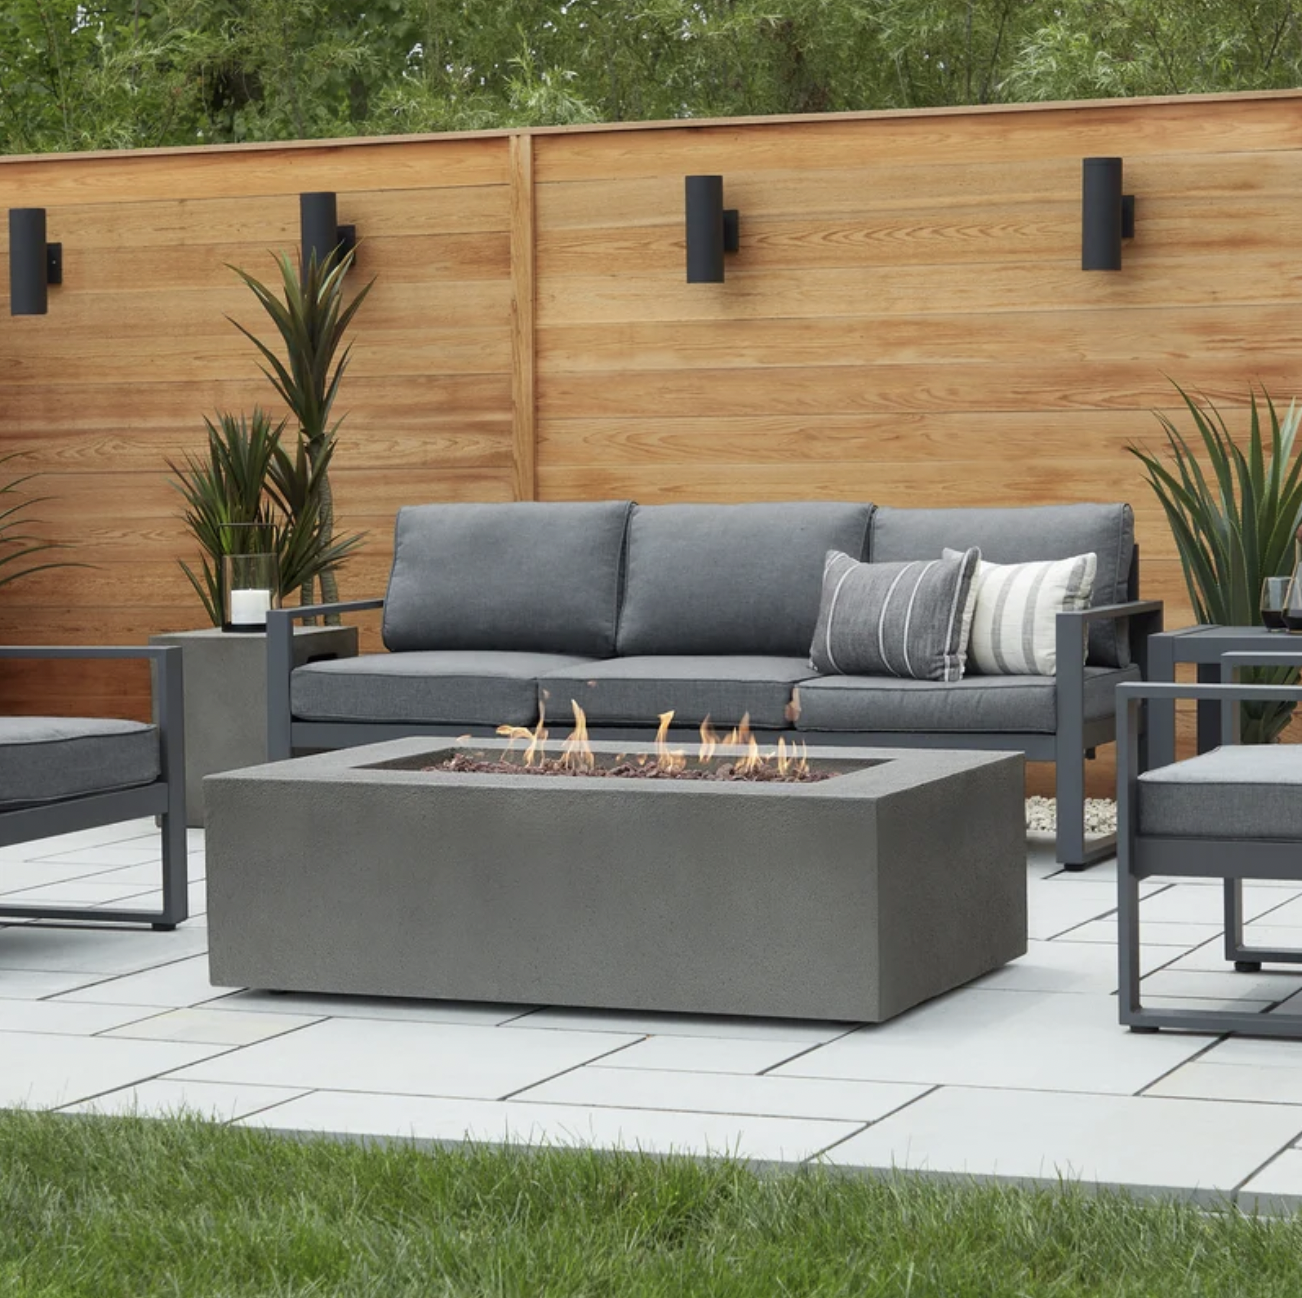 Baltic Concrete Fire Pit - The concrete finish of this rectangular propane gas fire pit table will blend well with warm, modern landscaping. Spacious at more than four feet long, there’s plenty of room for everyone to gather around—and with a 65000 BTU output, plenty of heat as well. SHOP NOW >” loading=”lazy”></noscript><br/><img decoding=